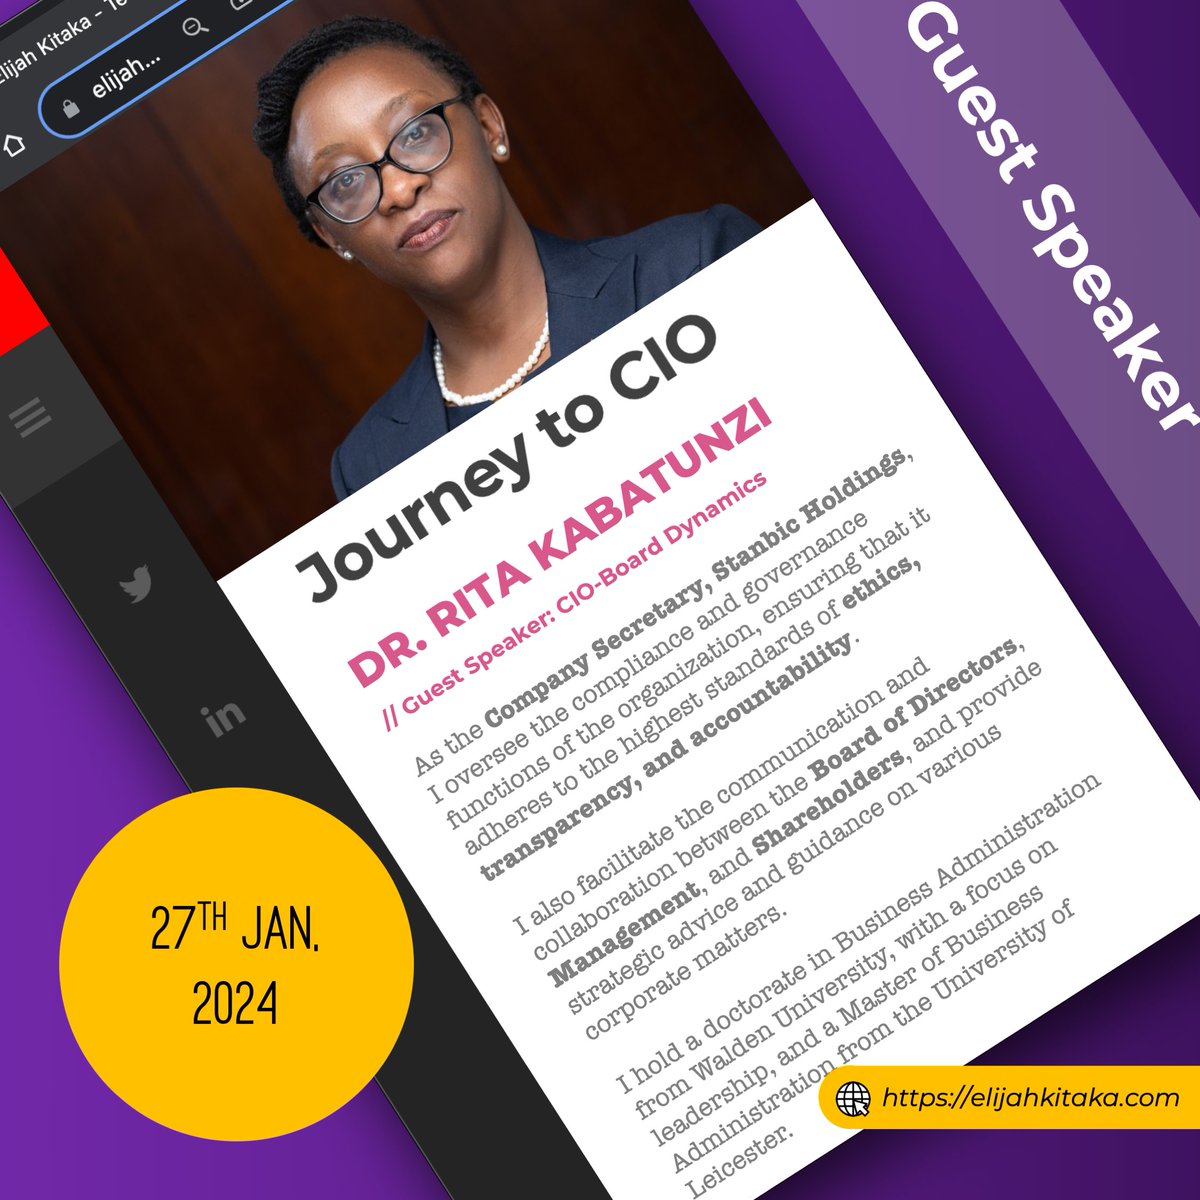 Journey to CIO: Guest Speaker Announcement We are pleased to be joined by Dr. Rita Kabatunzi to talk Board Dynamics to aspiring CIOs at the upcoming Journey to CIO bootcamp. Rita is a friend and former colleague. As Company Secretary at Stanbic Holdings, she always saved me…